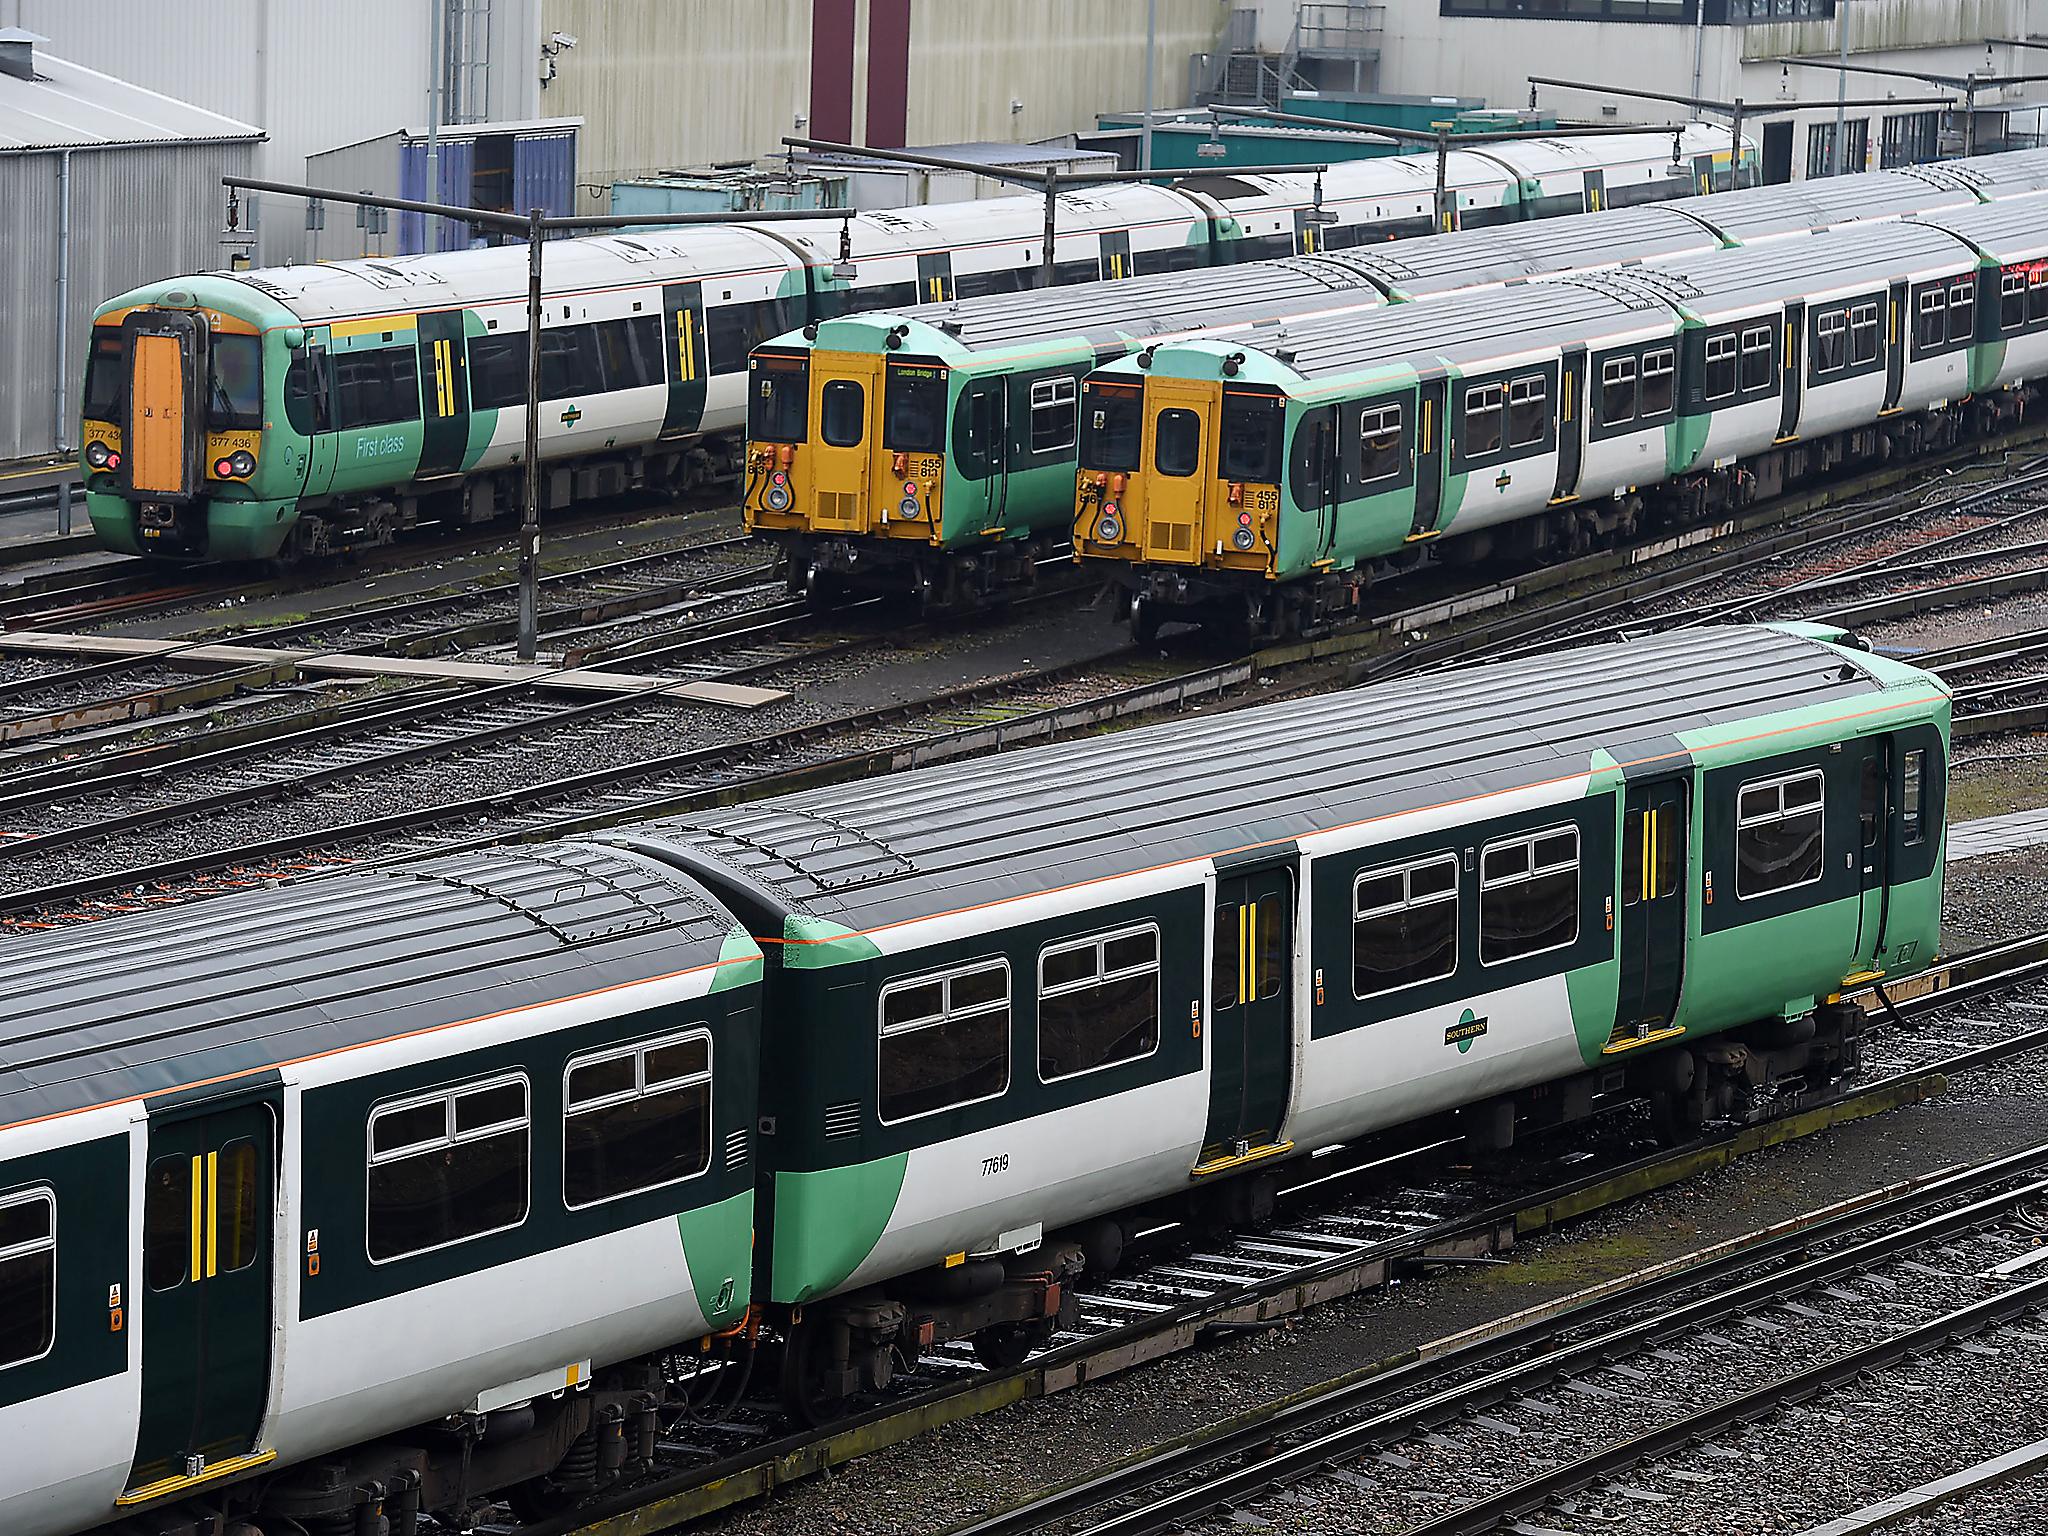 In the siding: Southern operator GTR has been hit with a £13.4m fine